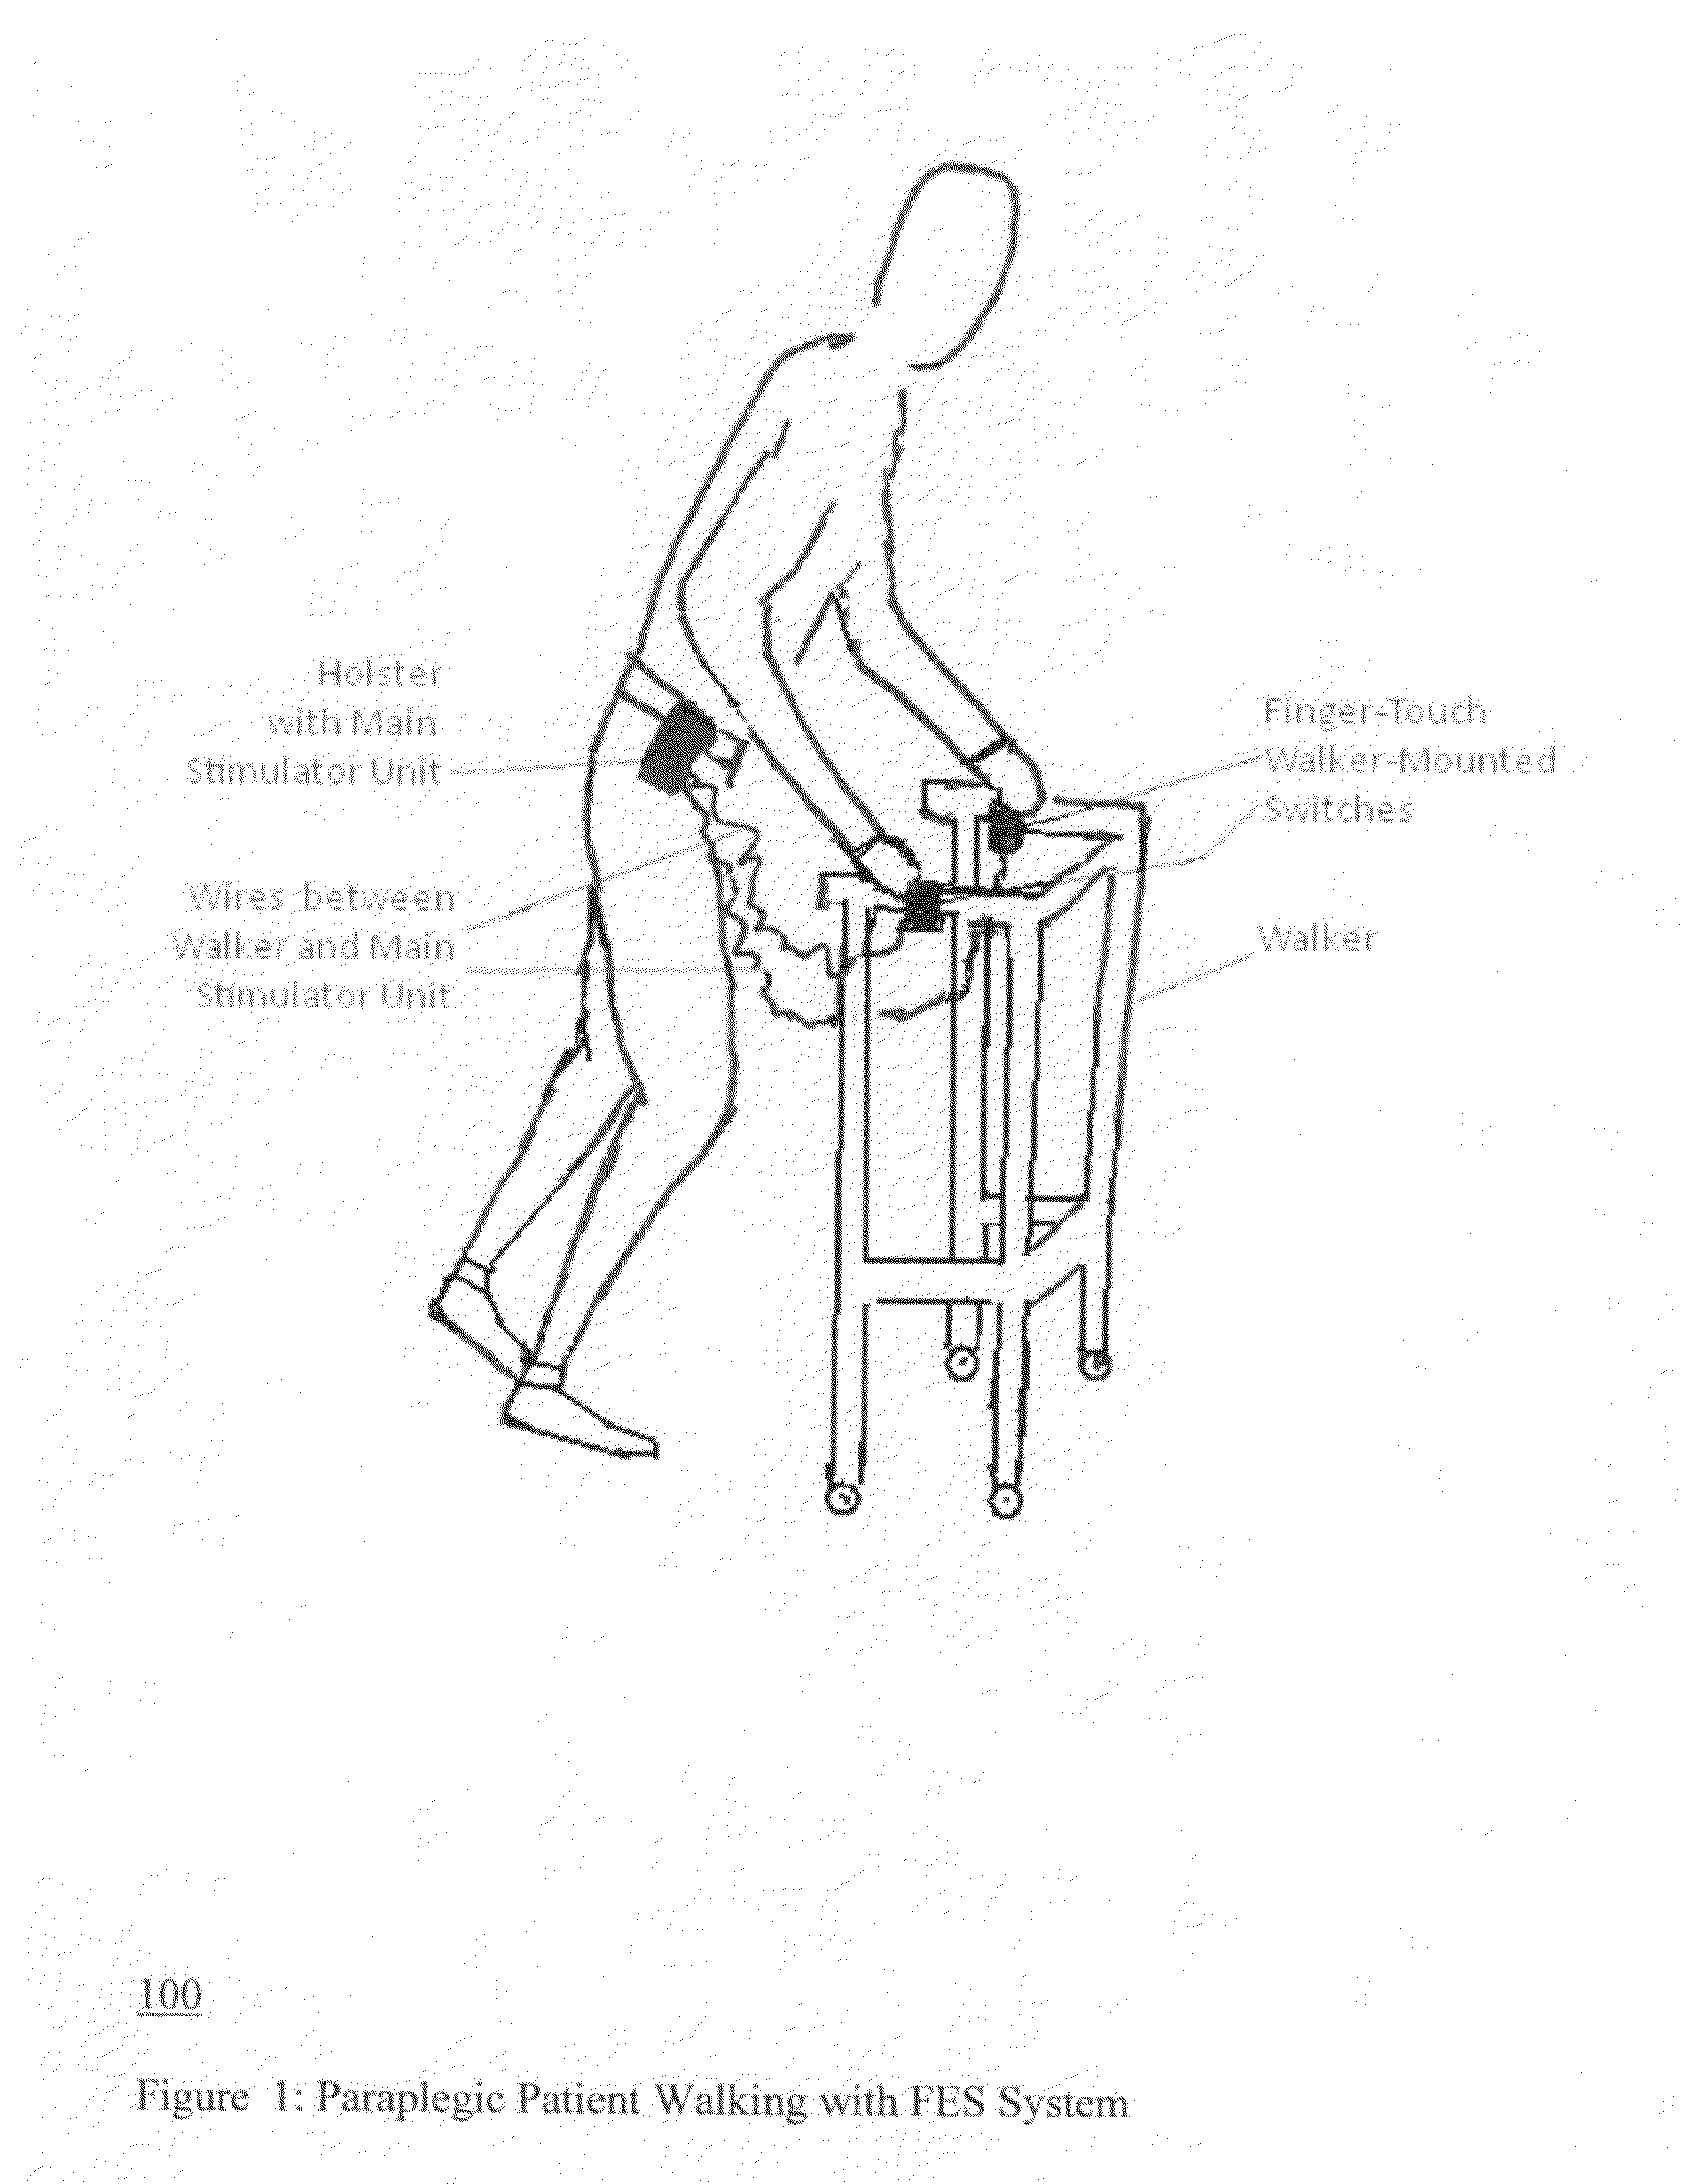 Noninvasive electrical stimulation system for standing and walking by paraplegic patients